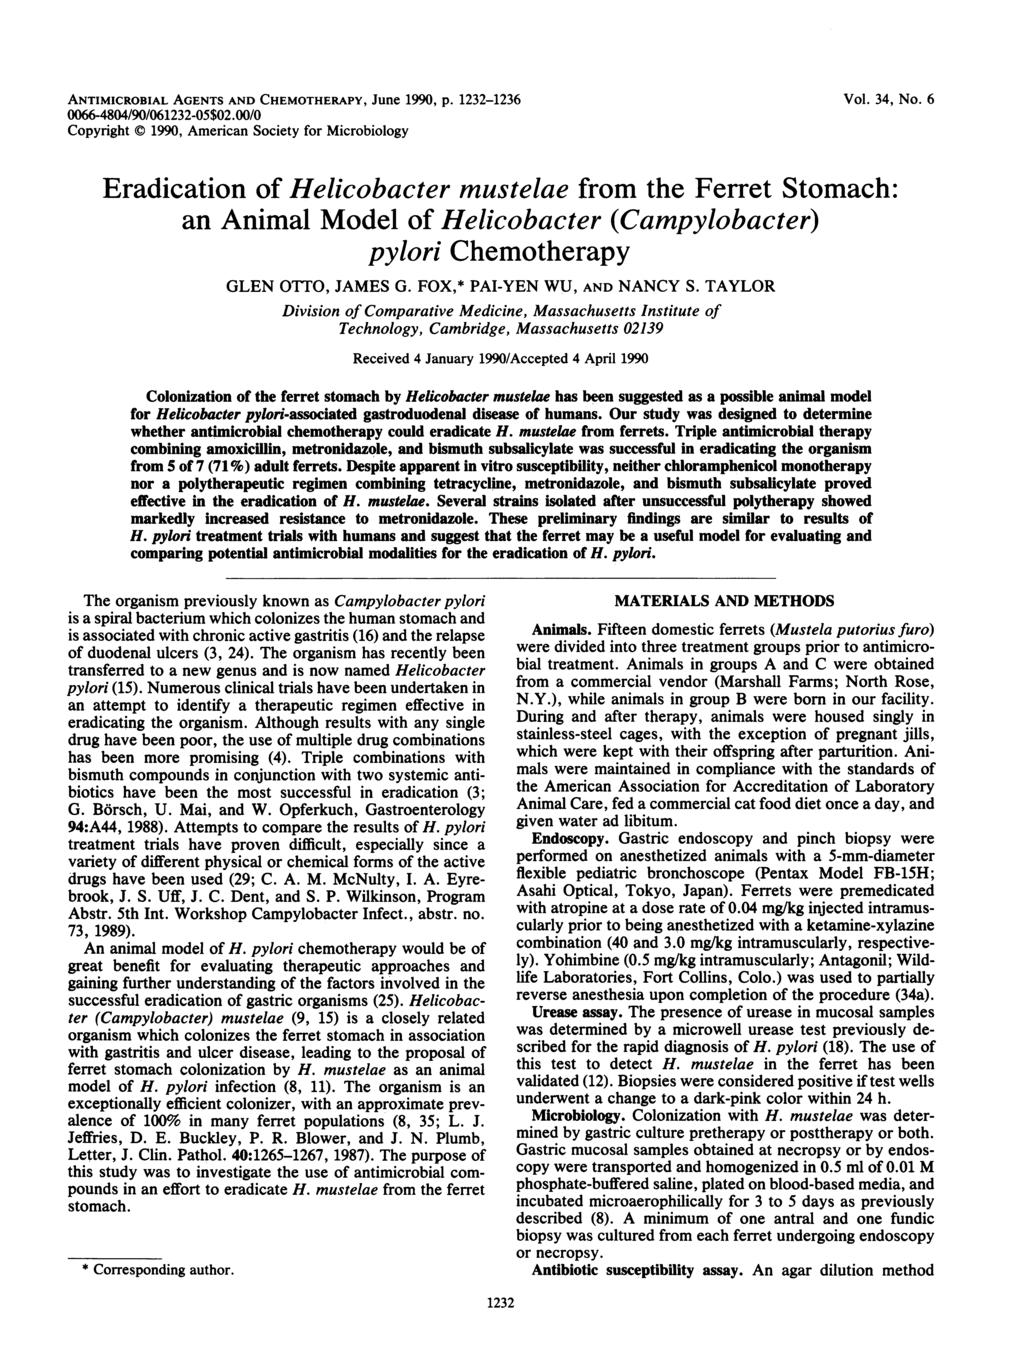 ANTIMICROBIAL AGENTS AND CHEMOTHERAPY, June 1990, p. 1232-1236 Vol. 34, No. 6 0066-4804/90/061232-05$02.